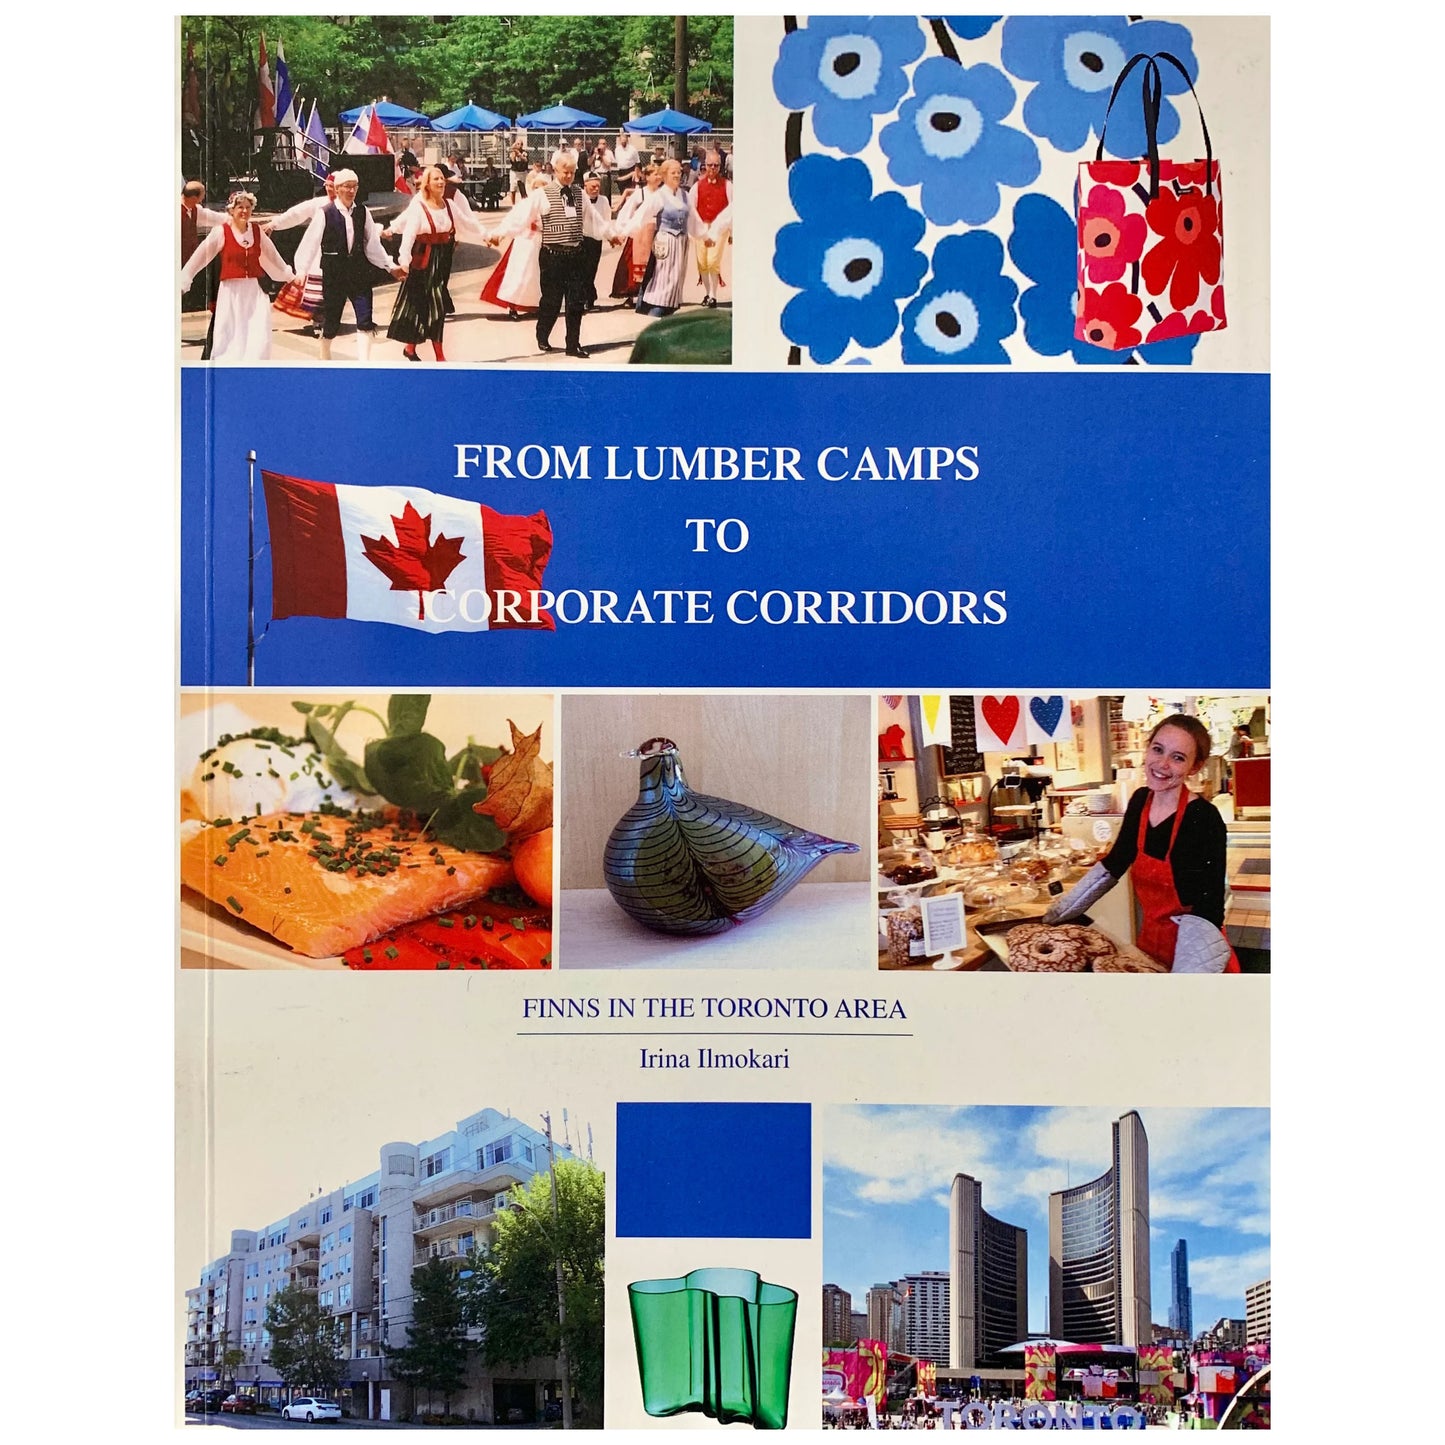 FROM LUMBER CAMPS TO CORPORATE CORRIDORS